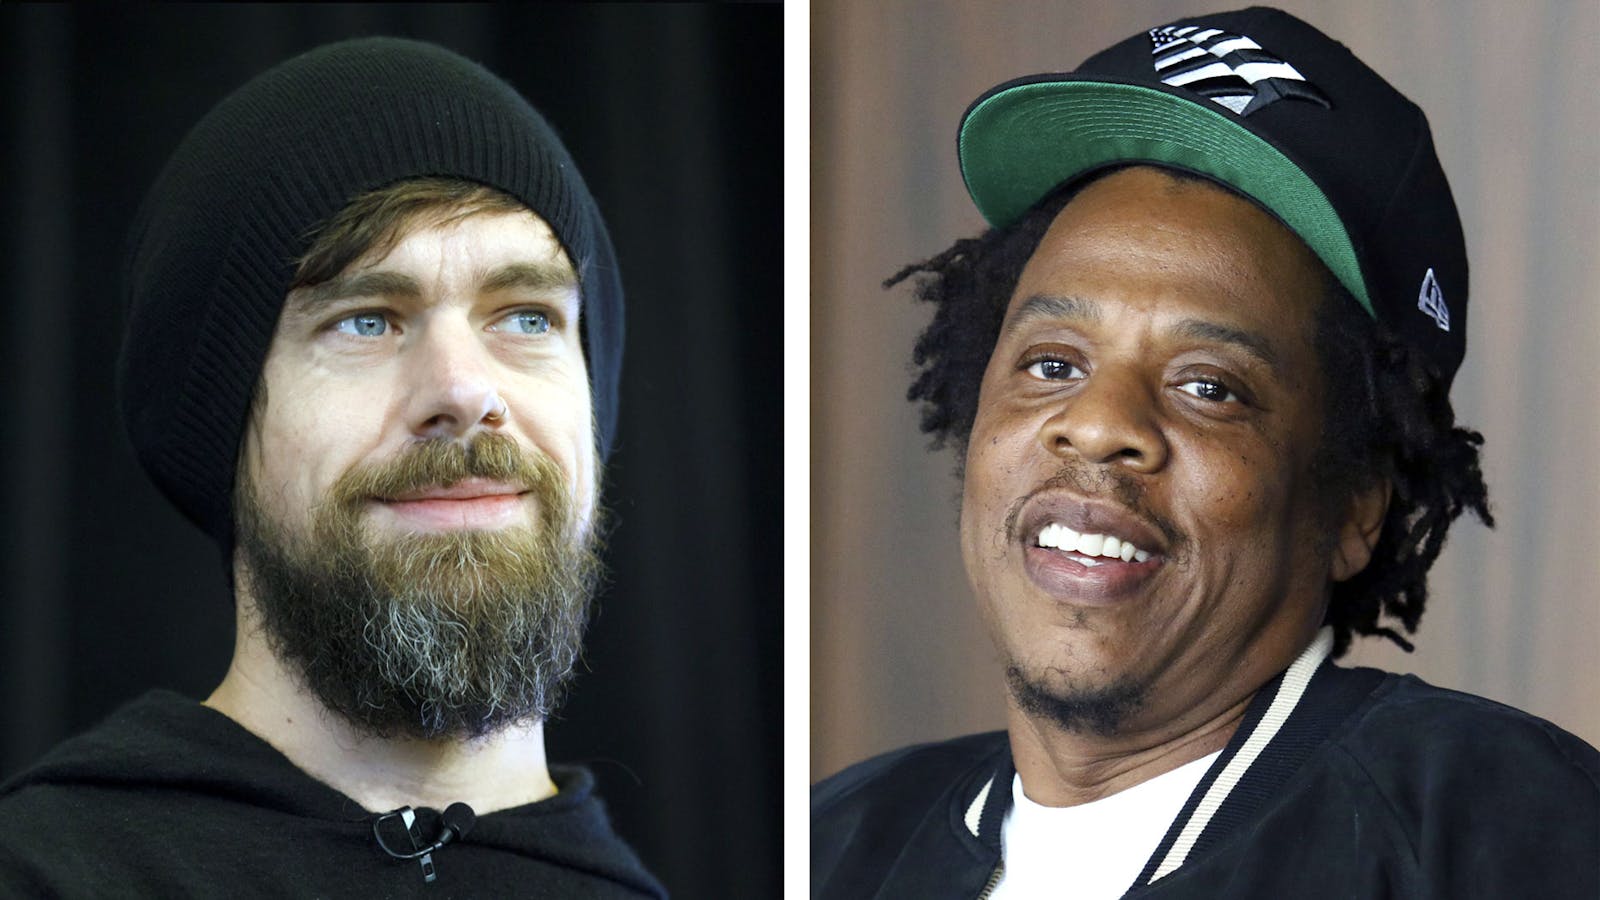 Jack Dorsey (left) and Jay Z. Photos by Bloomberg; AP